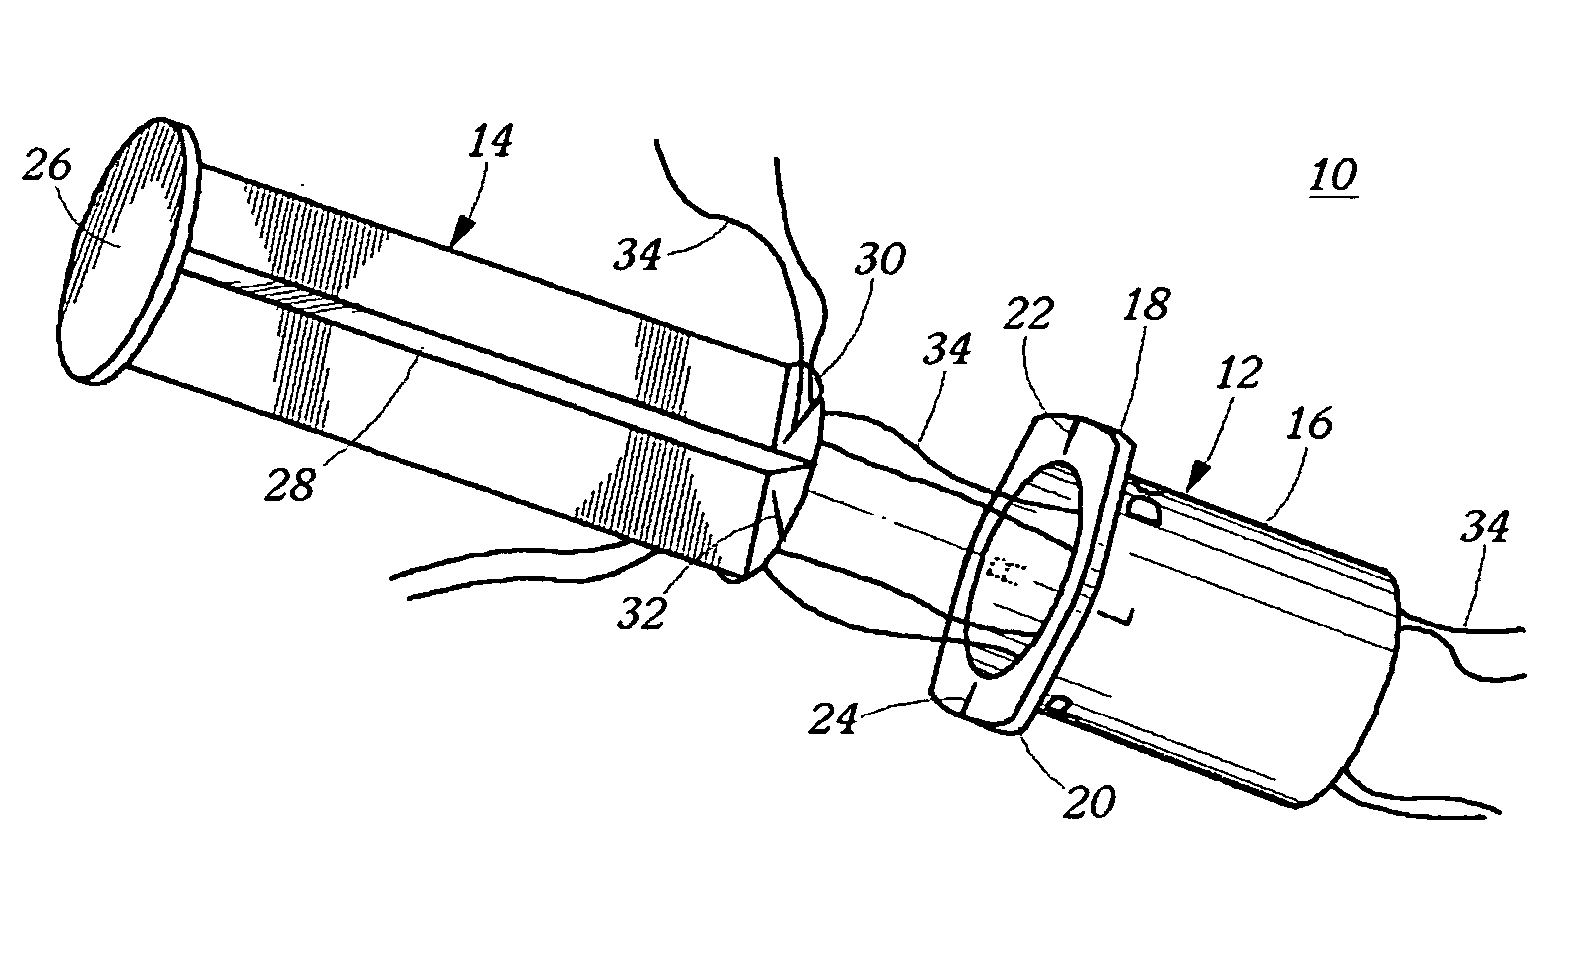 Method and device for umbilicus protection during abdominal surgery